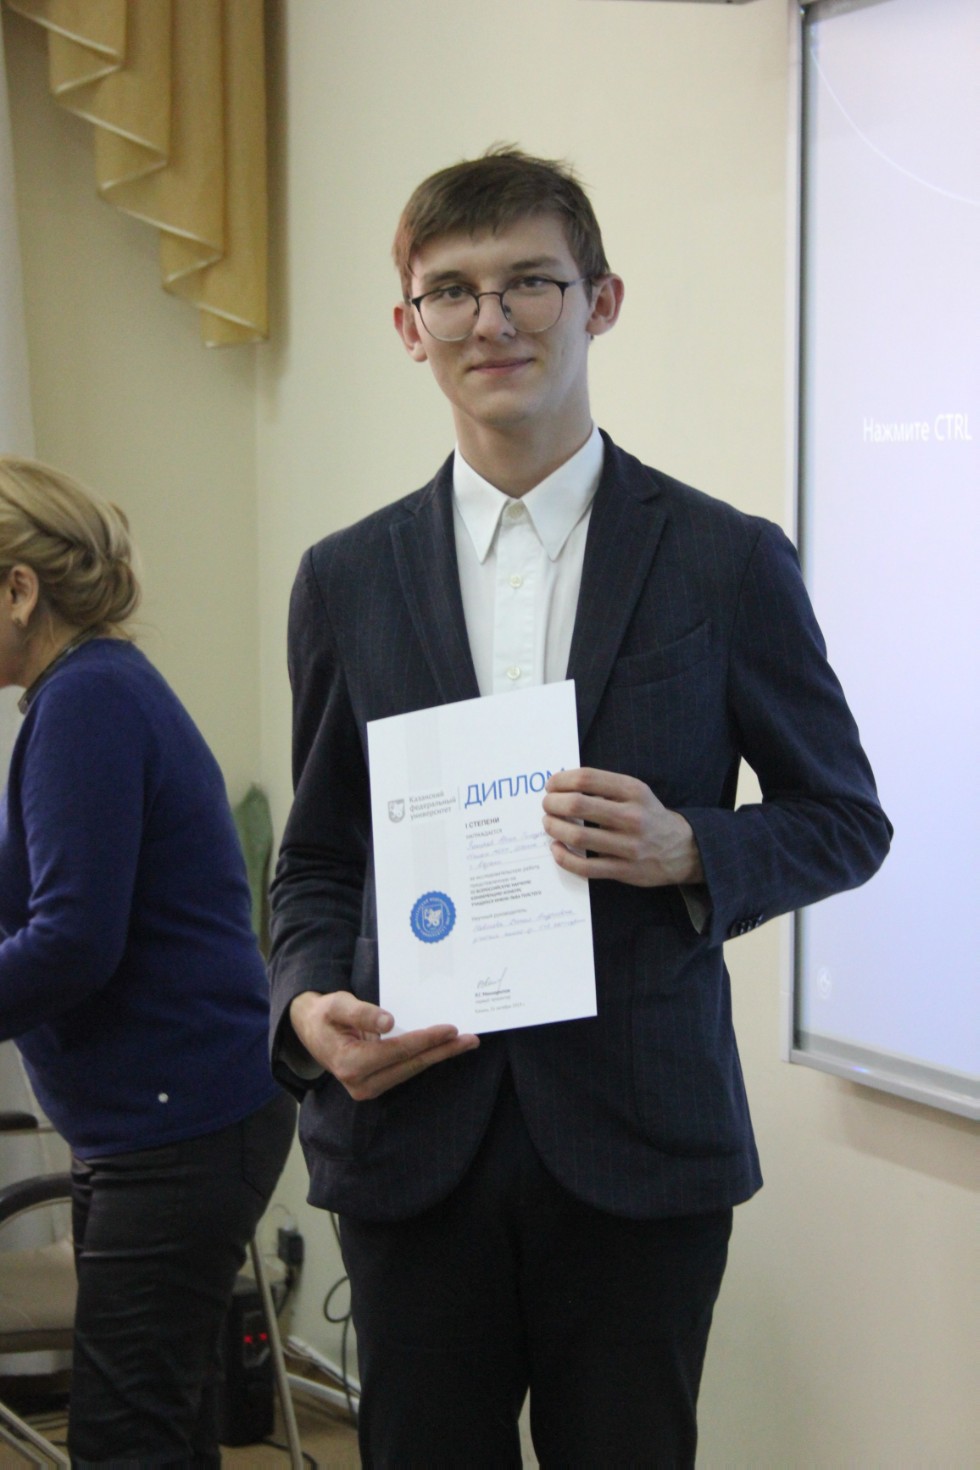 Third All-Russian Scientific Conference-Competition of Pupils named after Leo Tolstoy